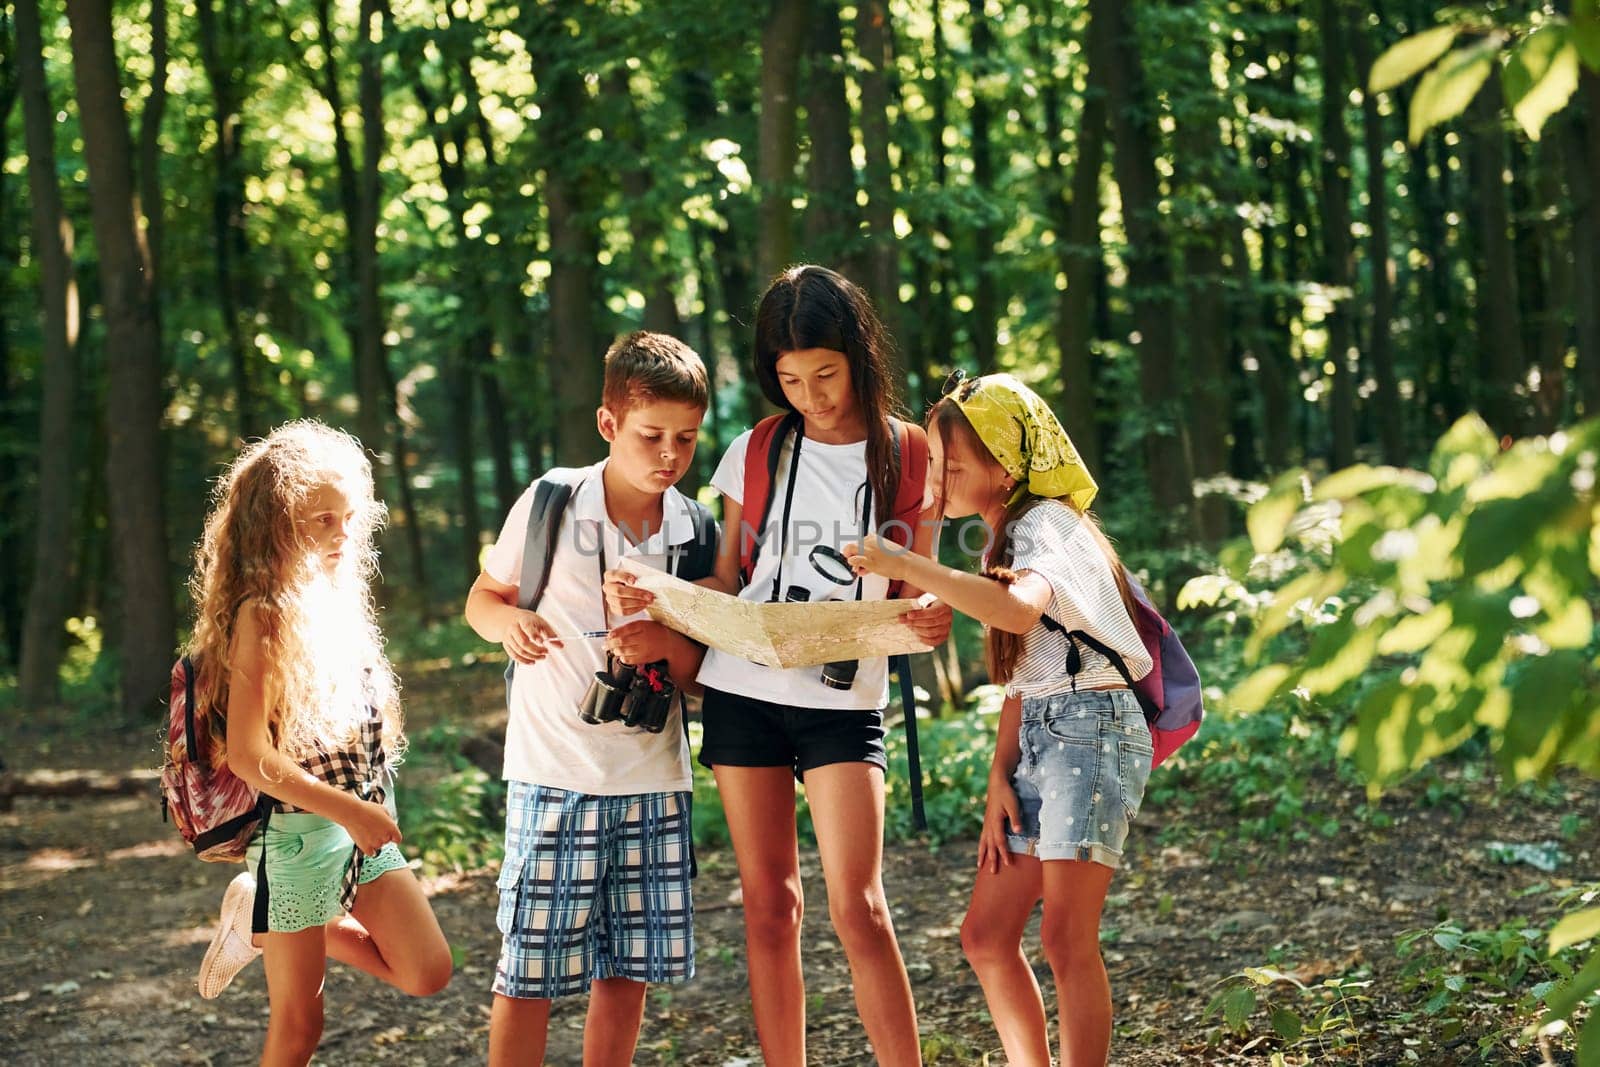 Using map to find a way. Kids strolling in the forest with travel equipment by Standret